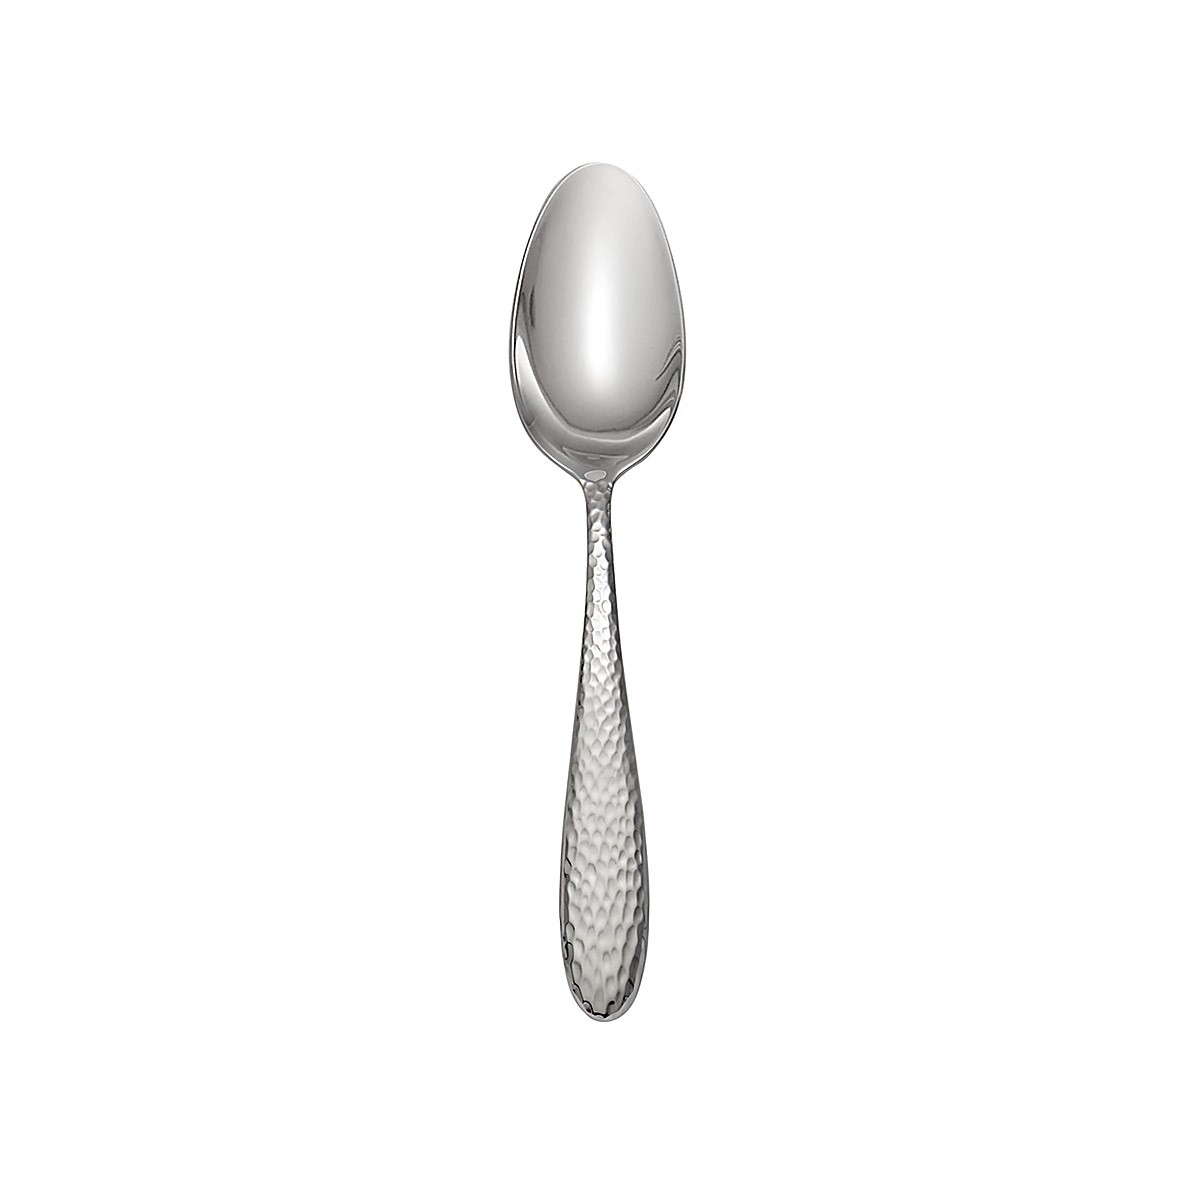 Tibet (hammered Stainless) Oval Soup Spoon